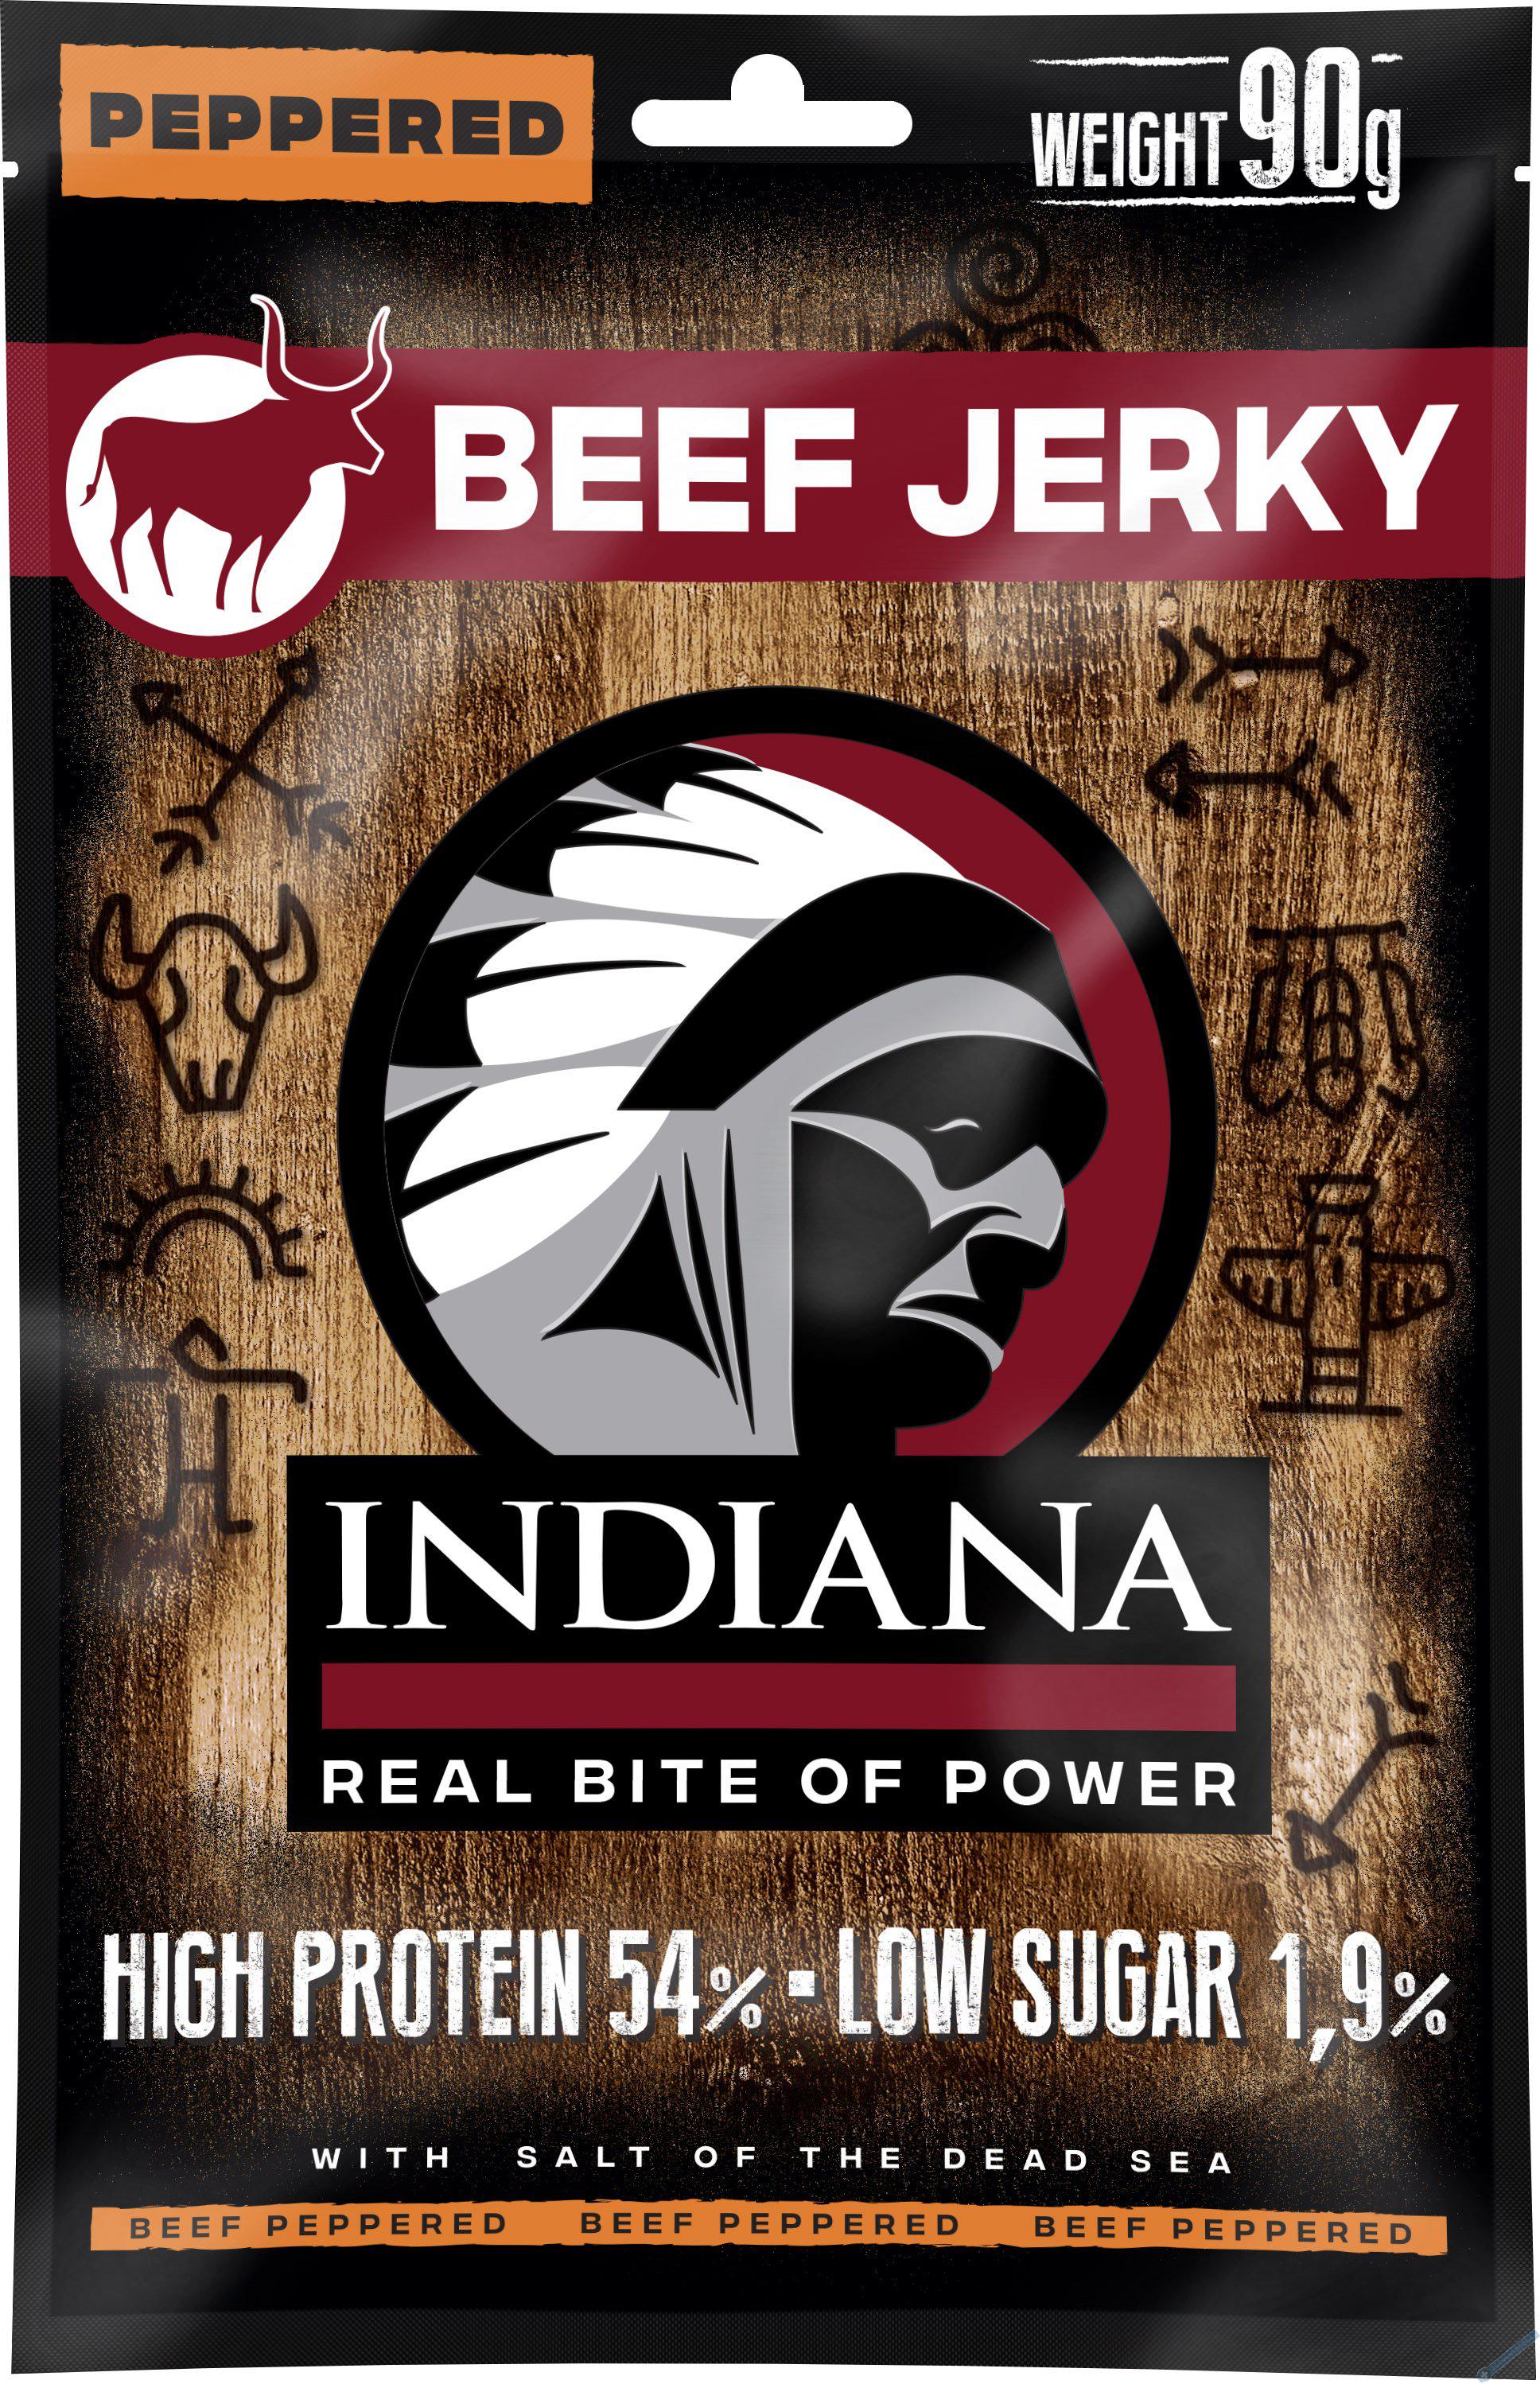 INDIANA Jerky hovz Peppered ZIP 90g